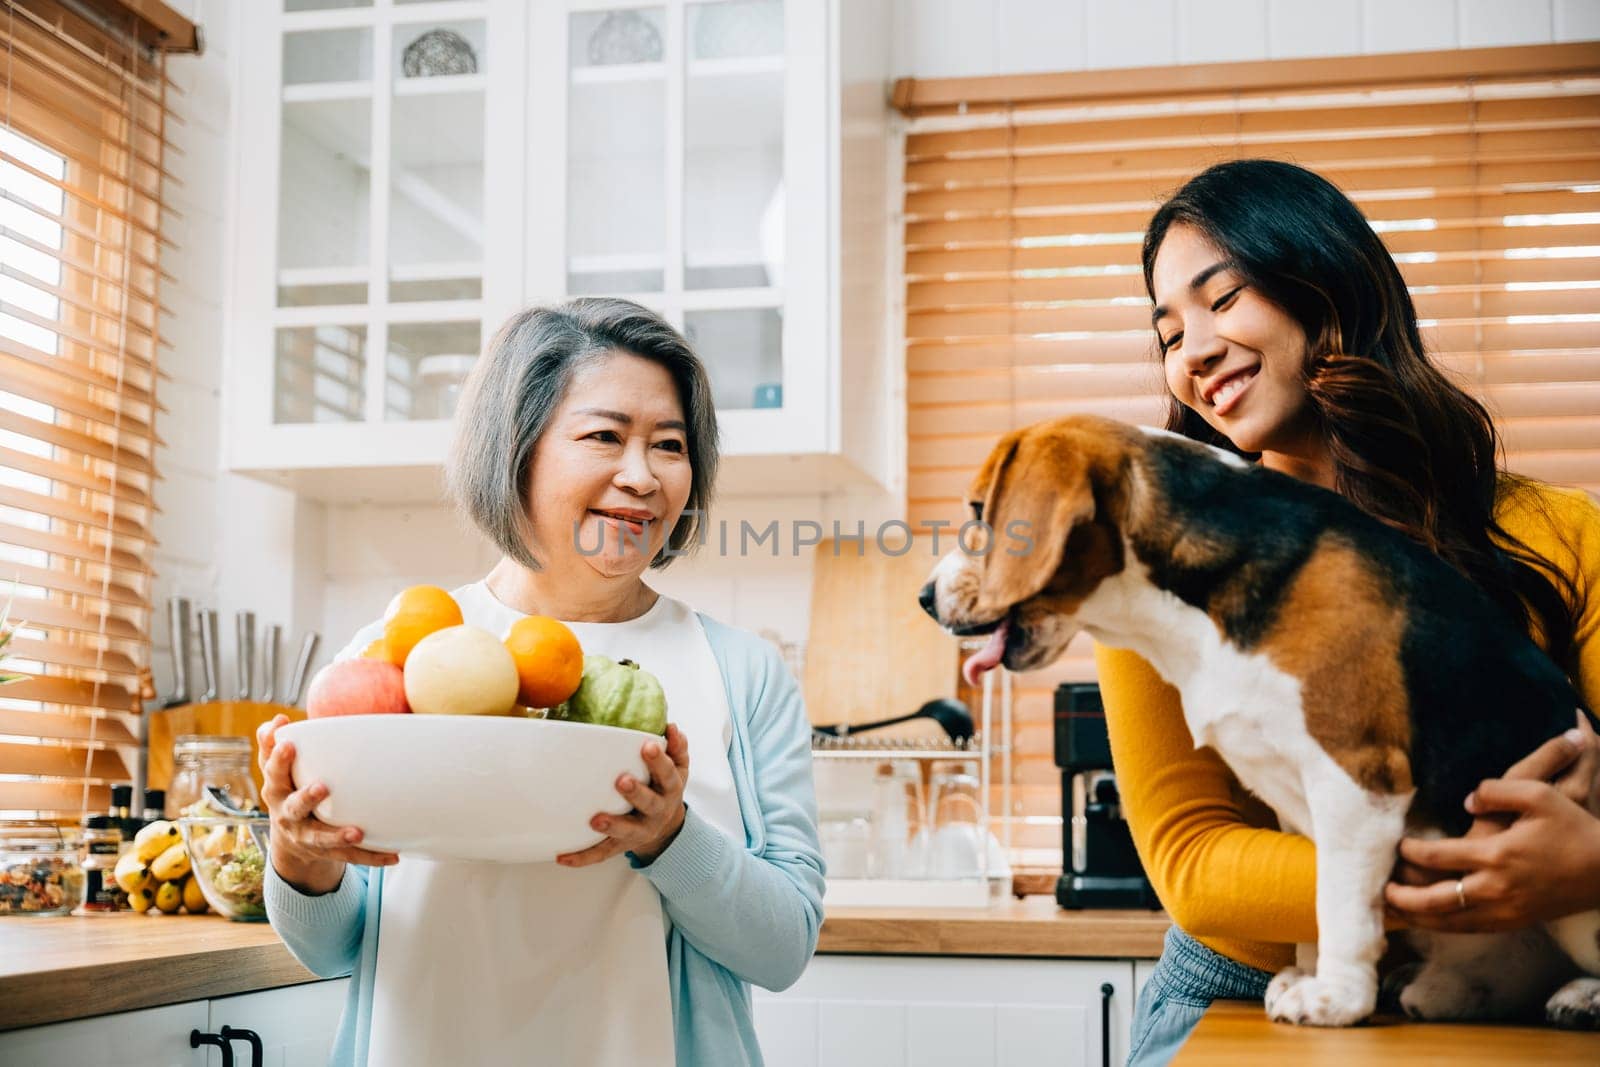 In the kitchen, an Asian family, including the grandmother and daughter, enjoys playful moments with their Beagle dog. The joy, togetherness, and owner-pet friendship are heartwarming. by Sorapop